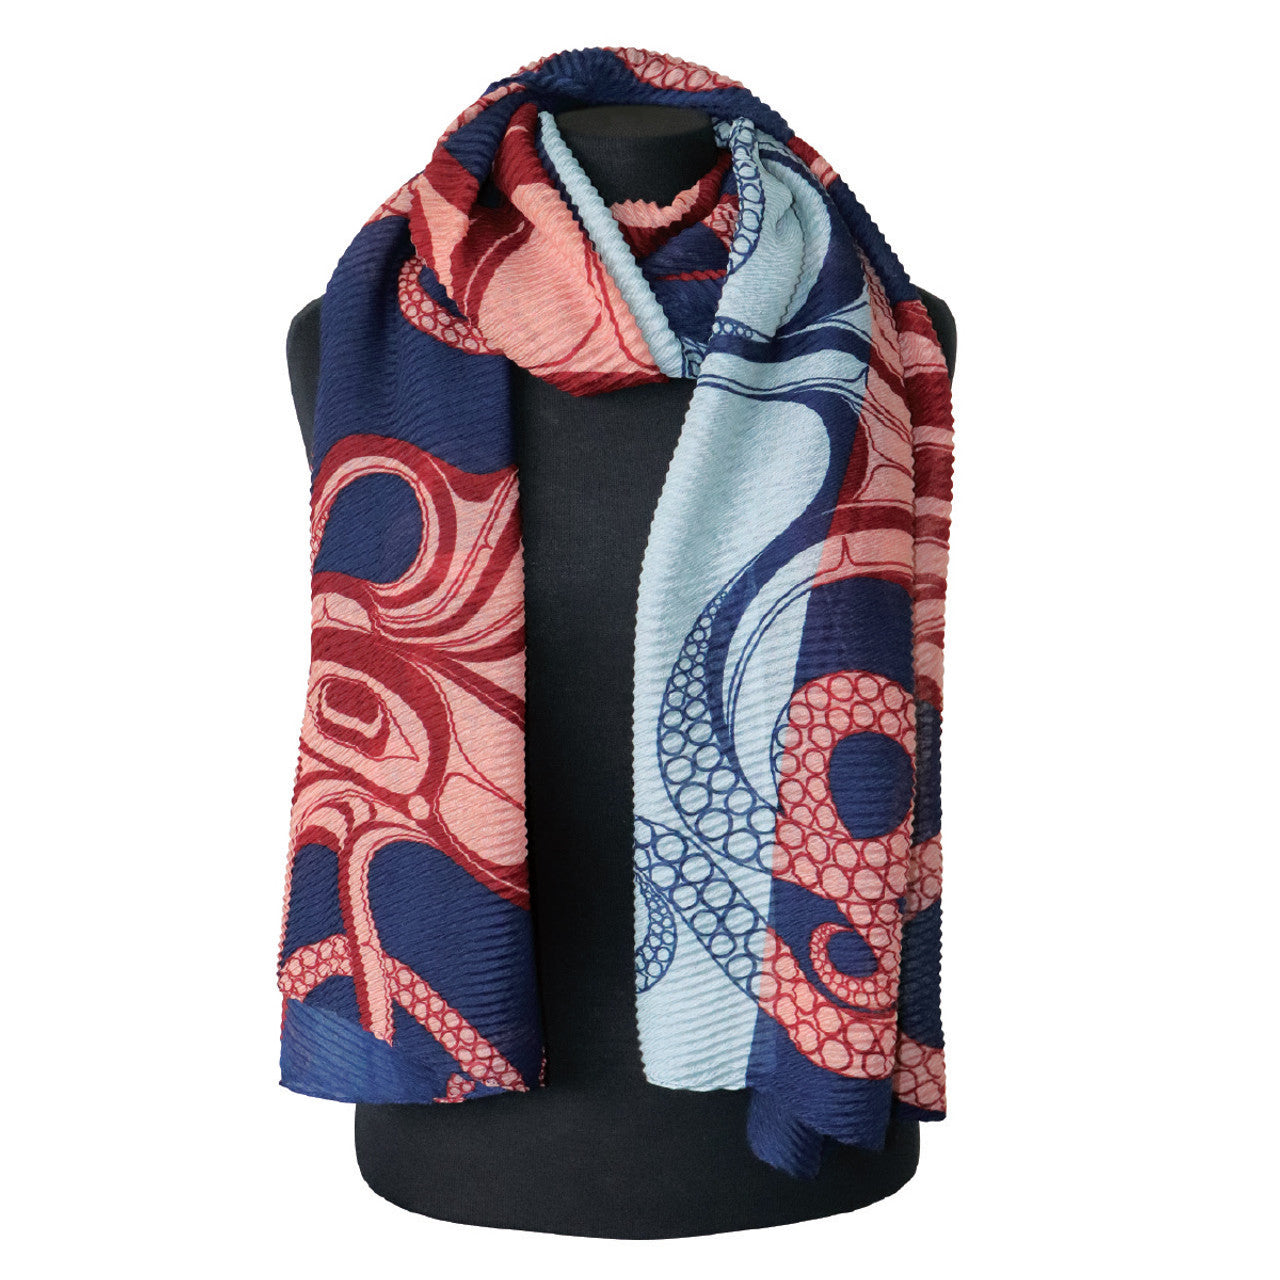 ECO SCARFS - Octopus - ESCARF22 - House of Himwitsa Native Art Gallery and Gifts